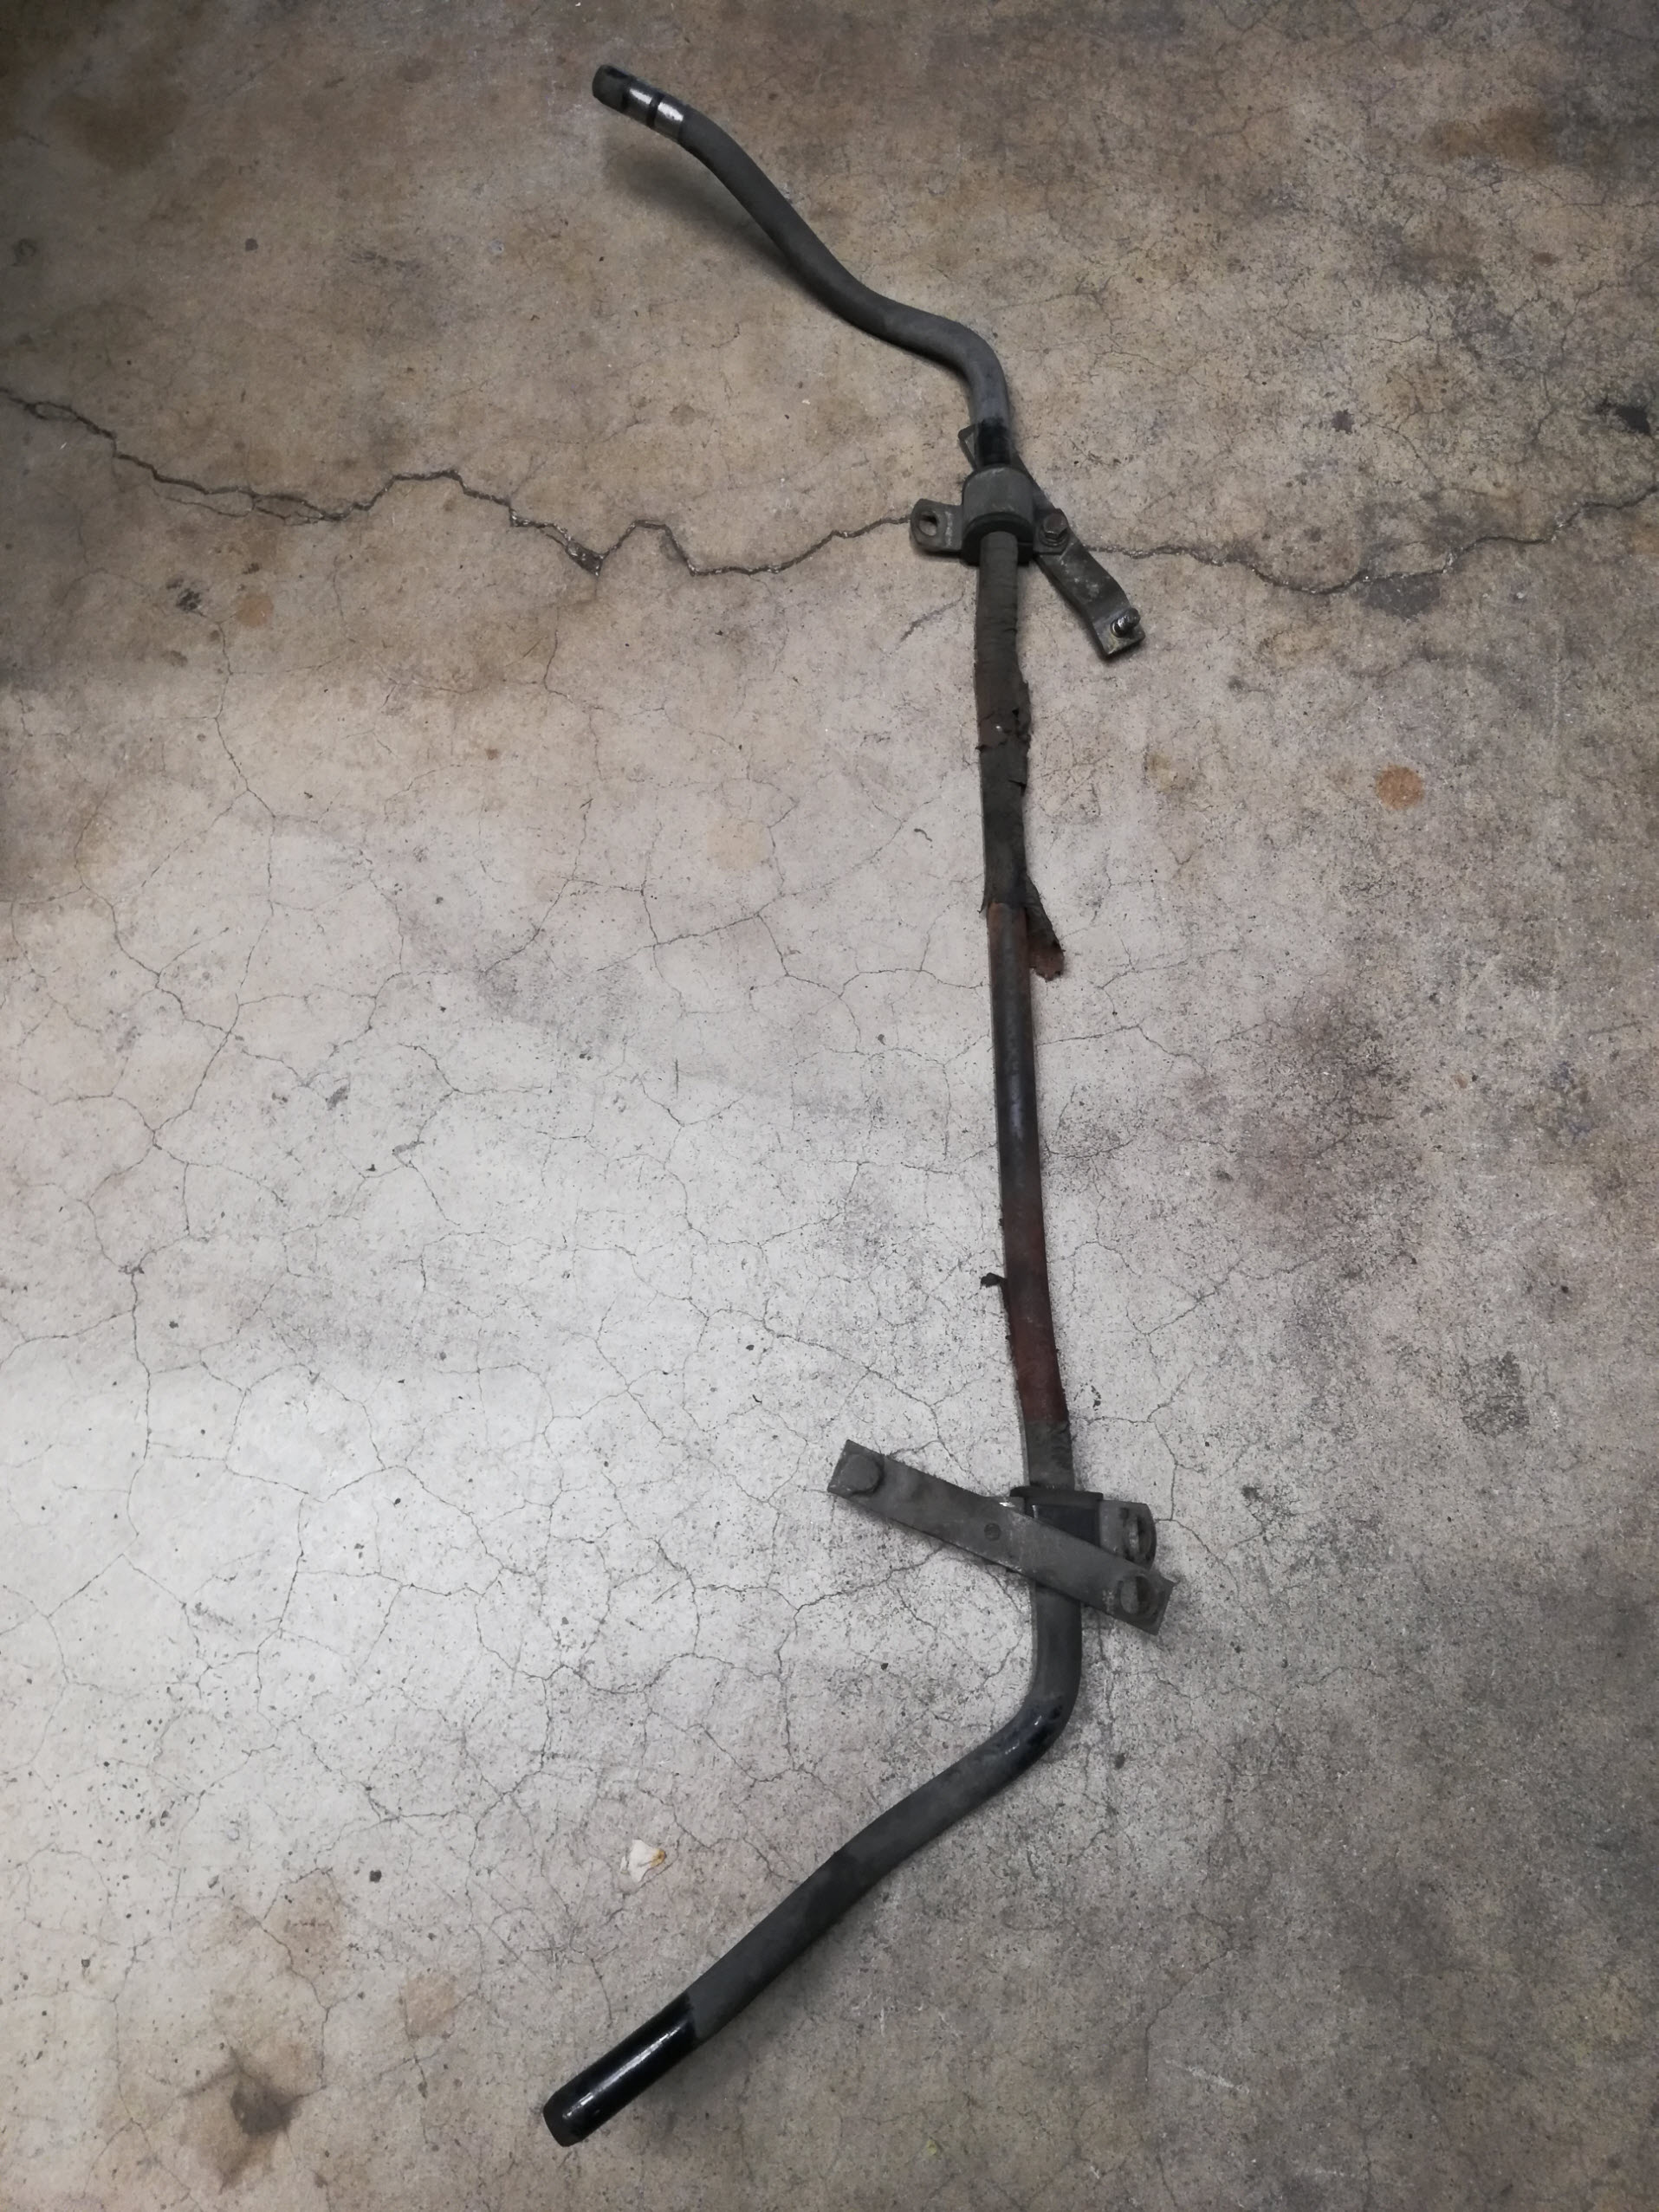 Air-cooled Porsche 911 front swaybar removed.